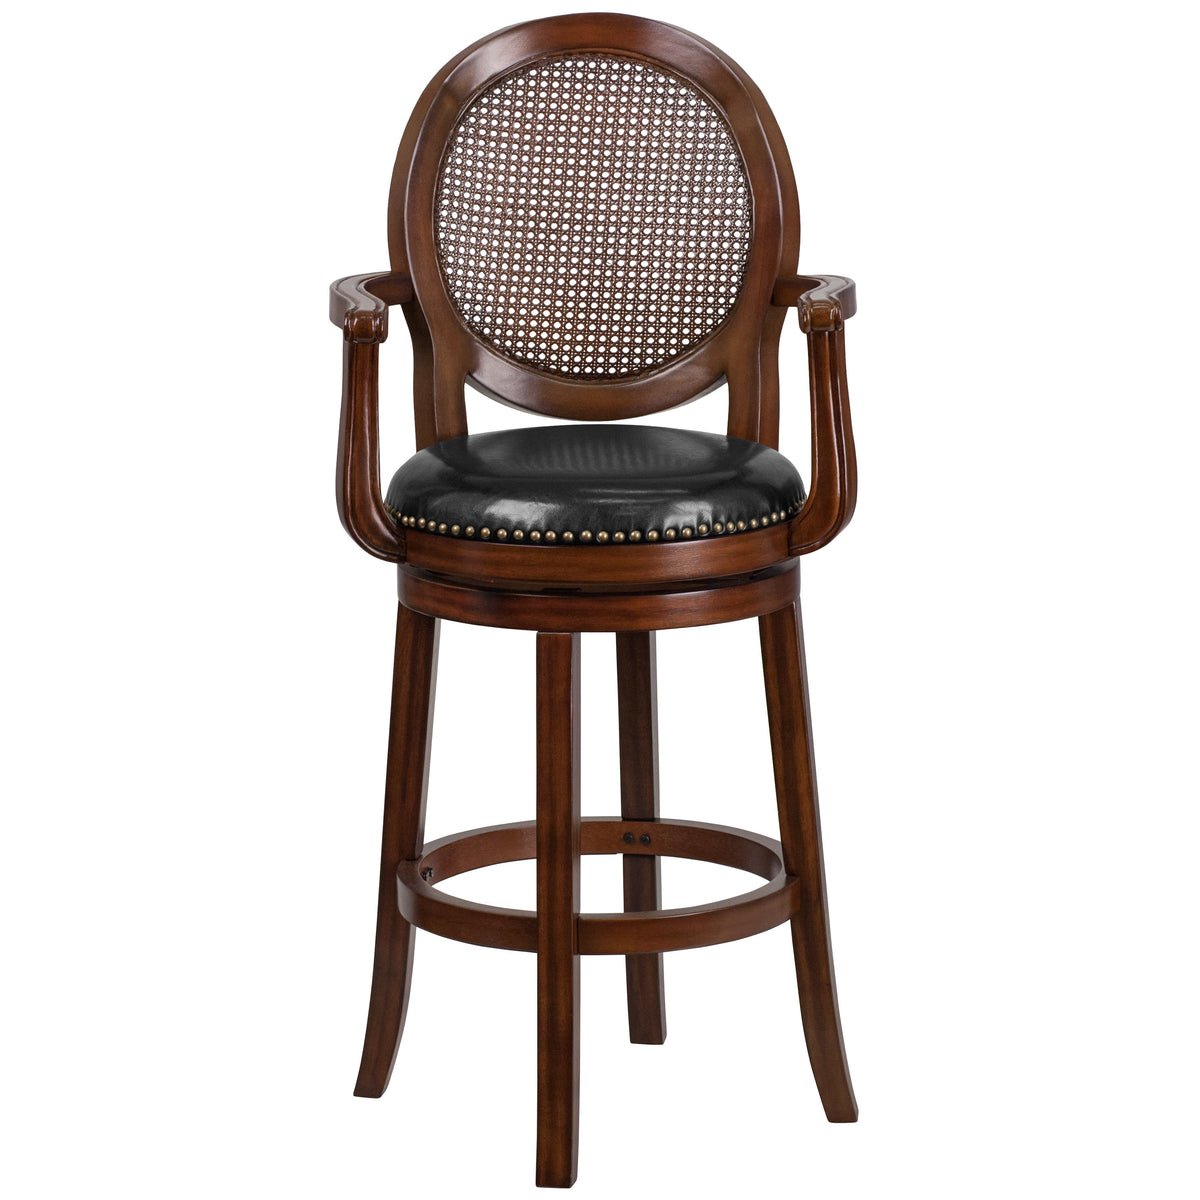 30inch High Expresso Barstool with Arms, Woven Rattan Back & Black LeatherSoft Seat